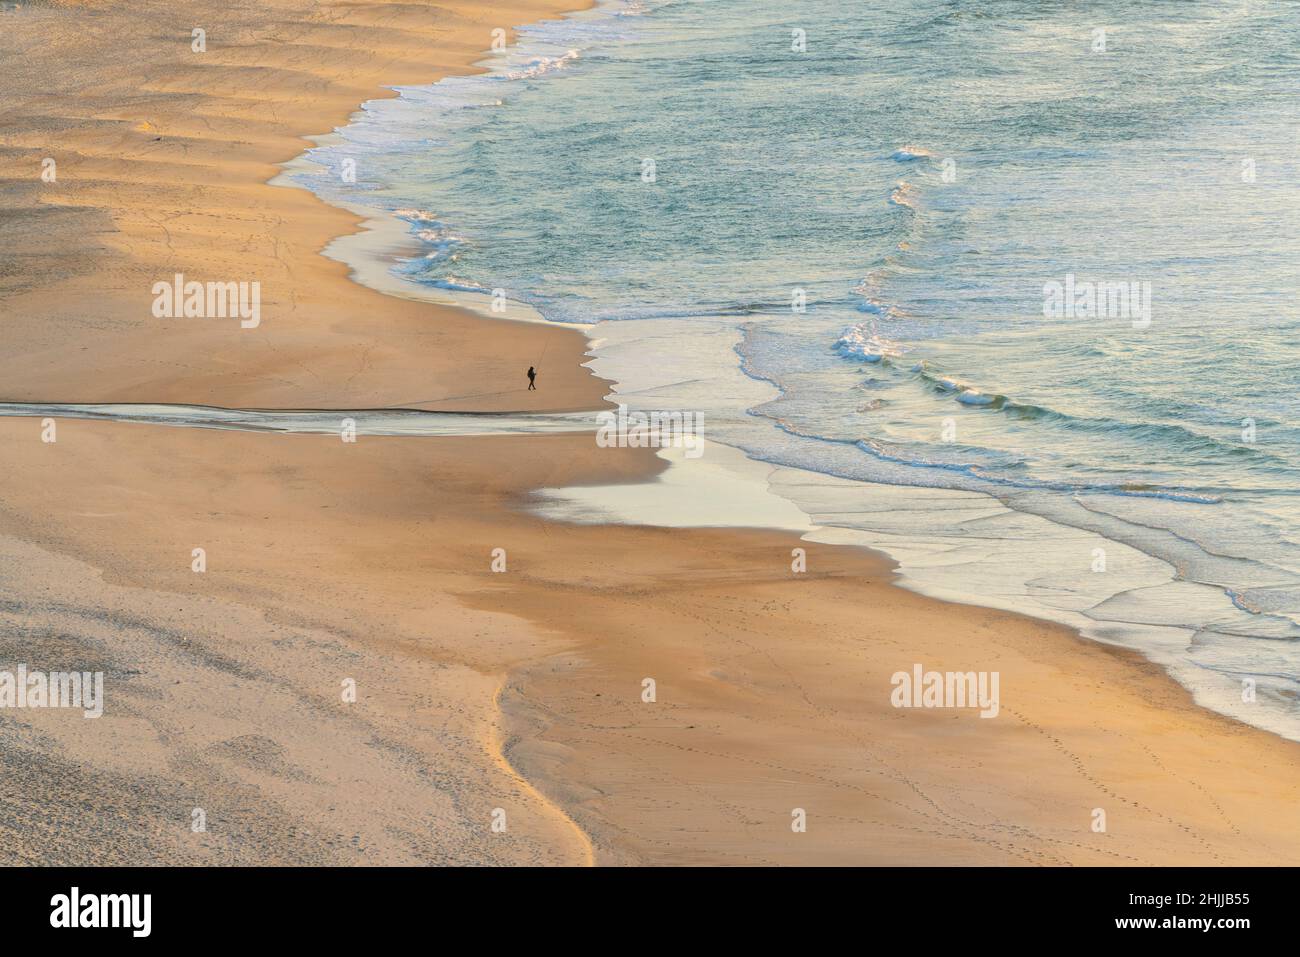 One person alone on a beach Stock Photo